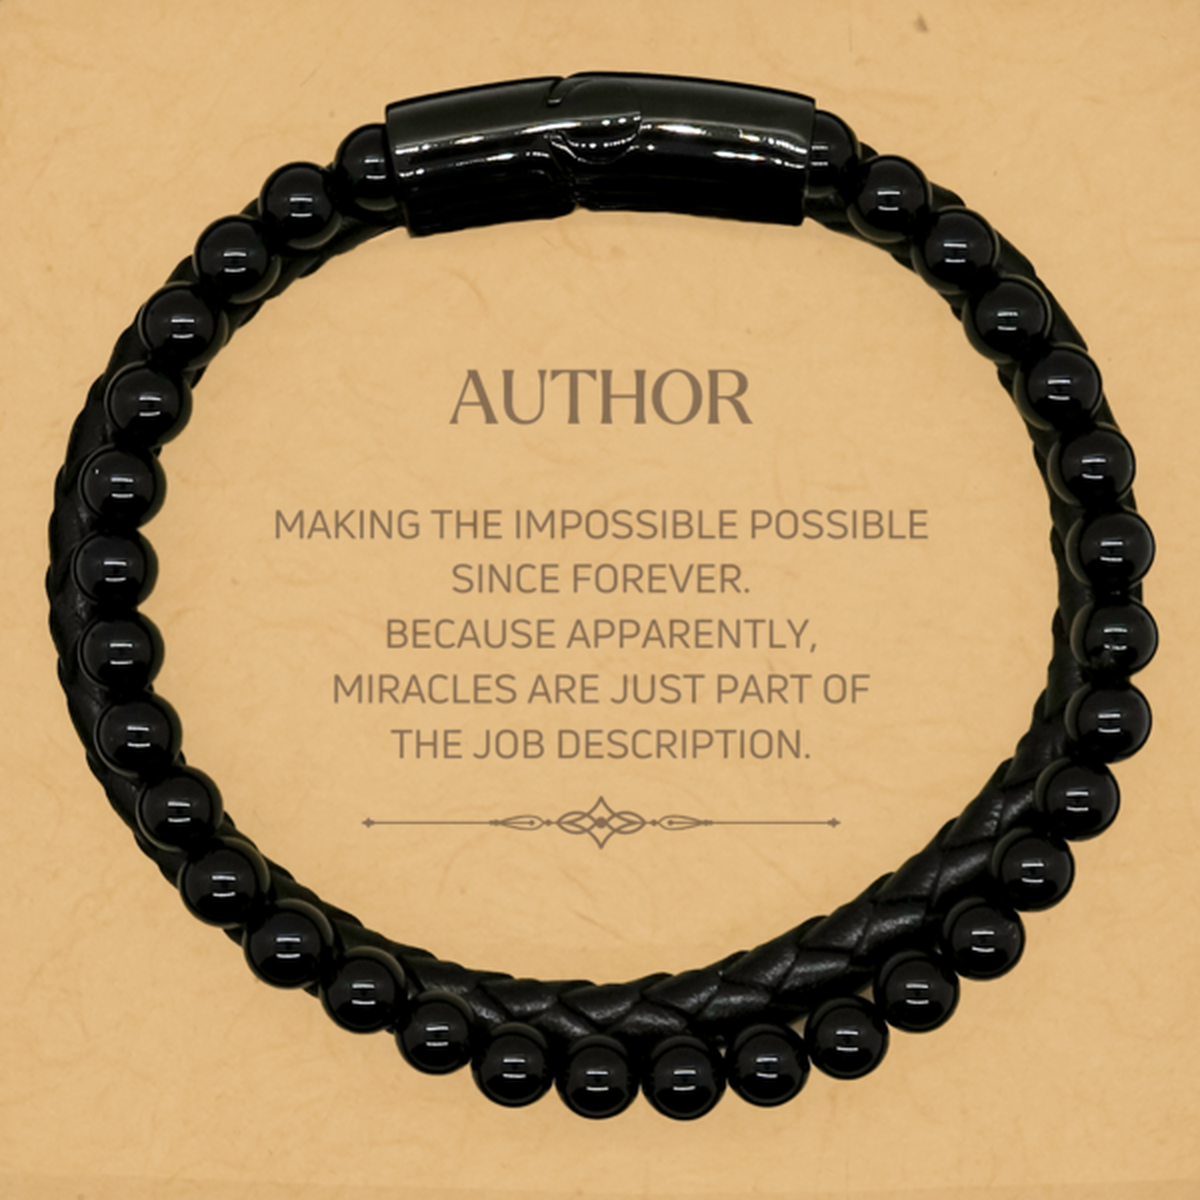 Funny Author Gifts, Miracles are just part of the job description, Inspirational Birthday Stone Leather Bracelets For Author, Men, Women, Coworkers, Friends, Boss